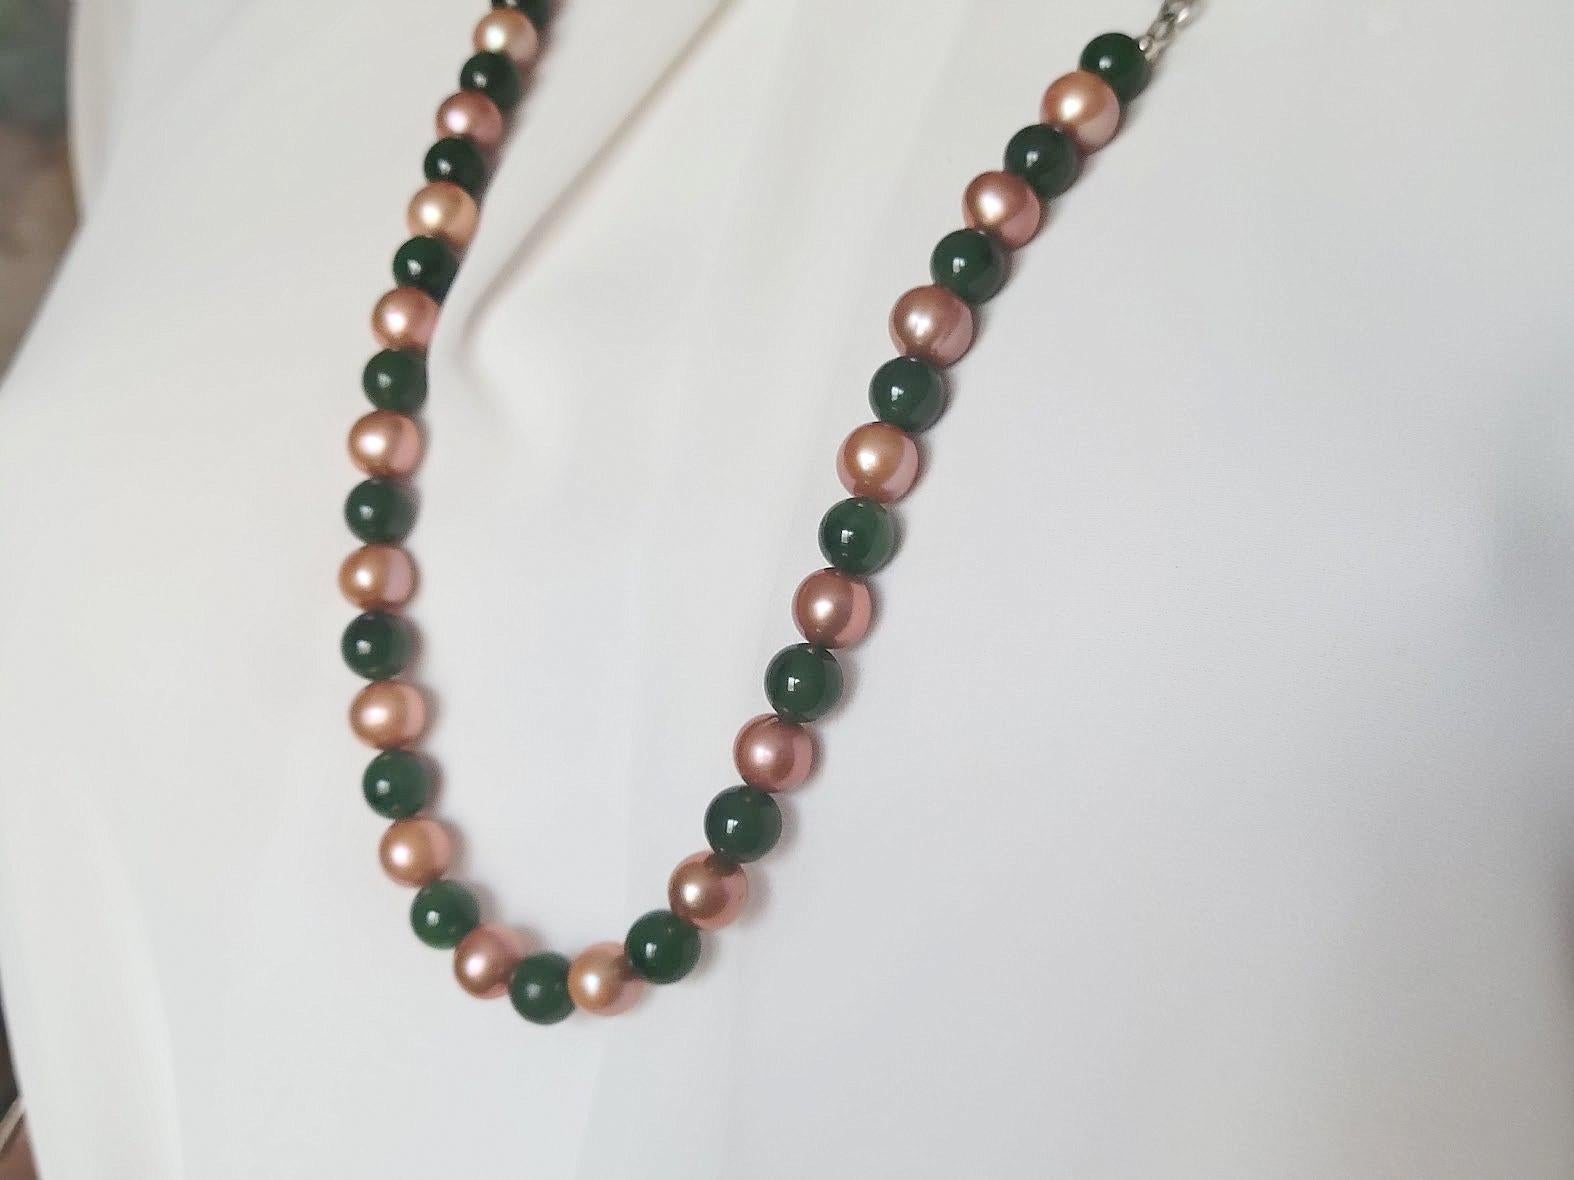 Siberian Nephrite Jade and Freshwater Pearls Necklace In Excellent Condition For Sale In Chesterland, OH